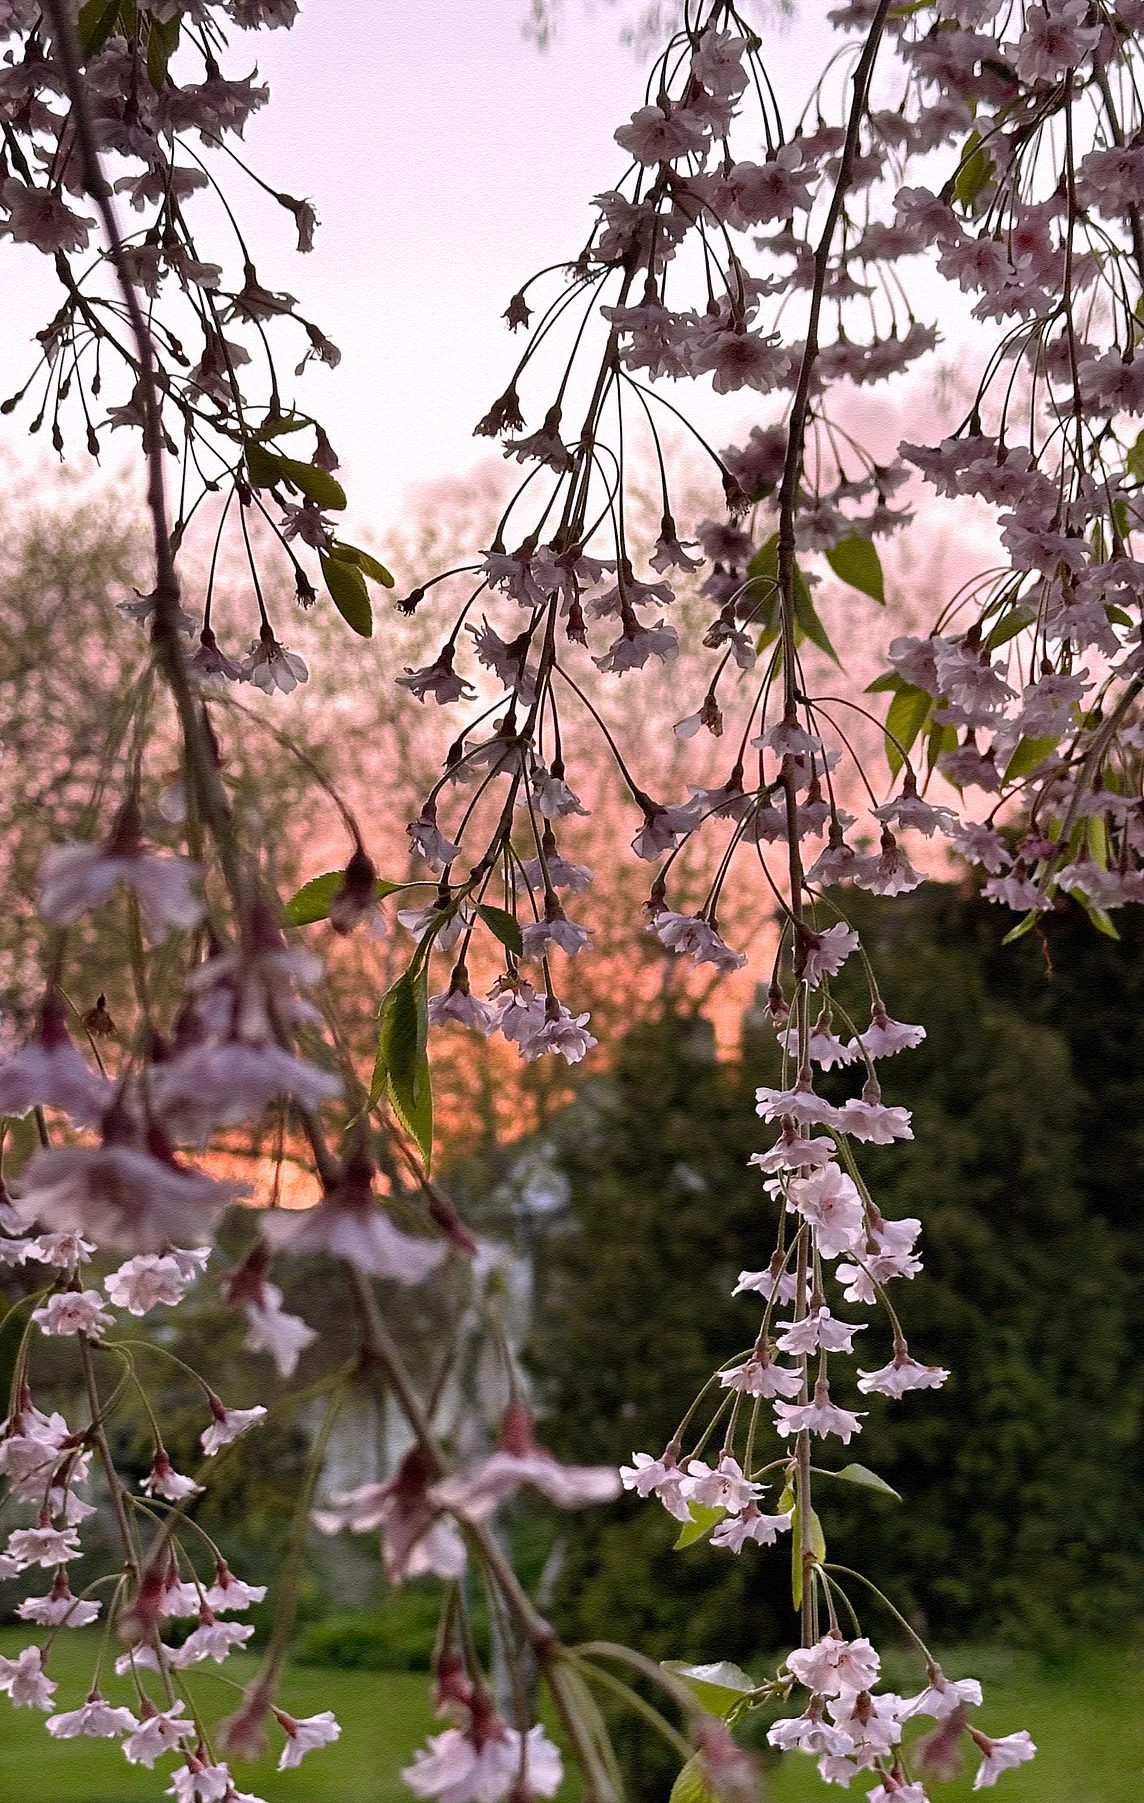 Spring, walking at sunset, nature’s mood booster amidst pink weeping cherry tree blossoms | © pockett dessert